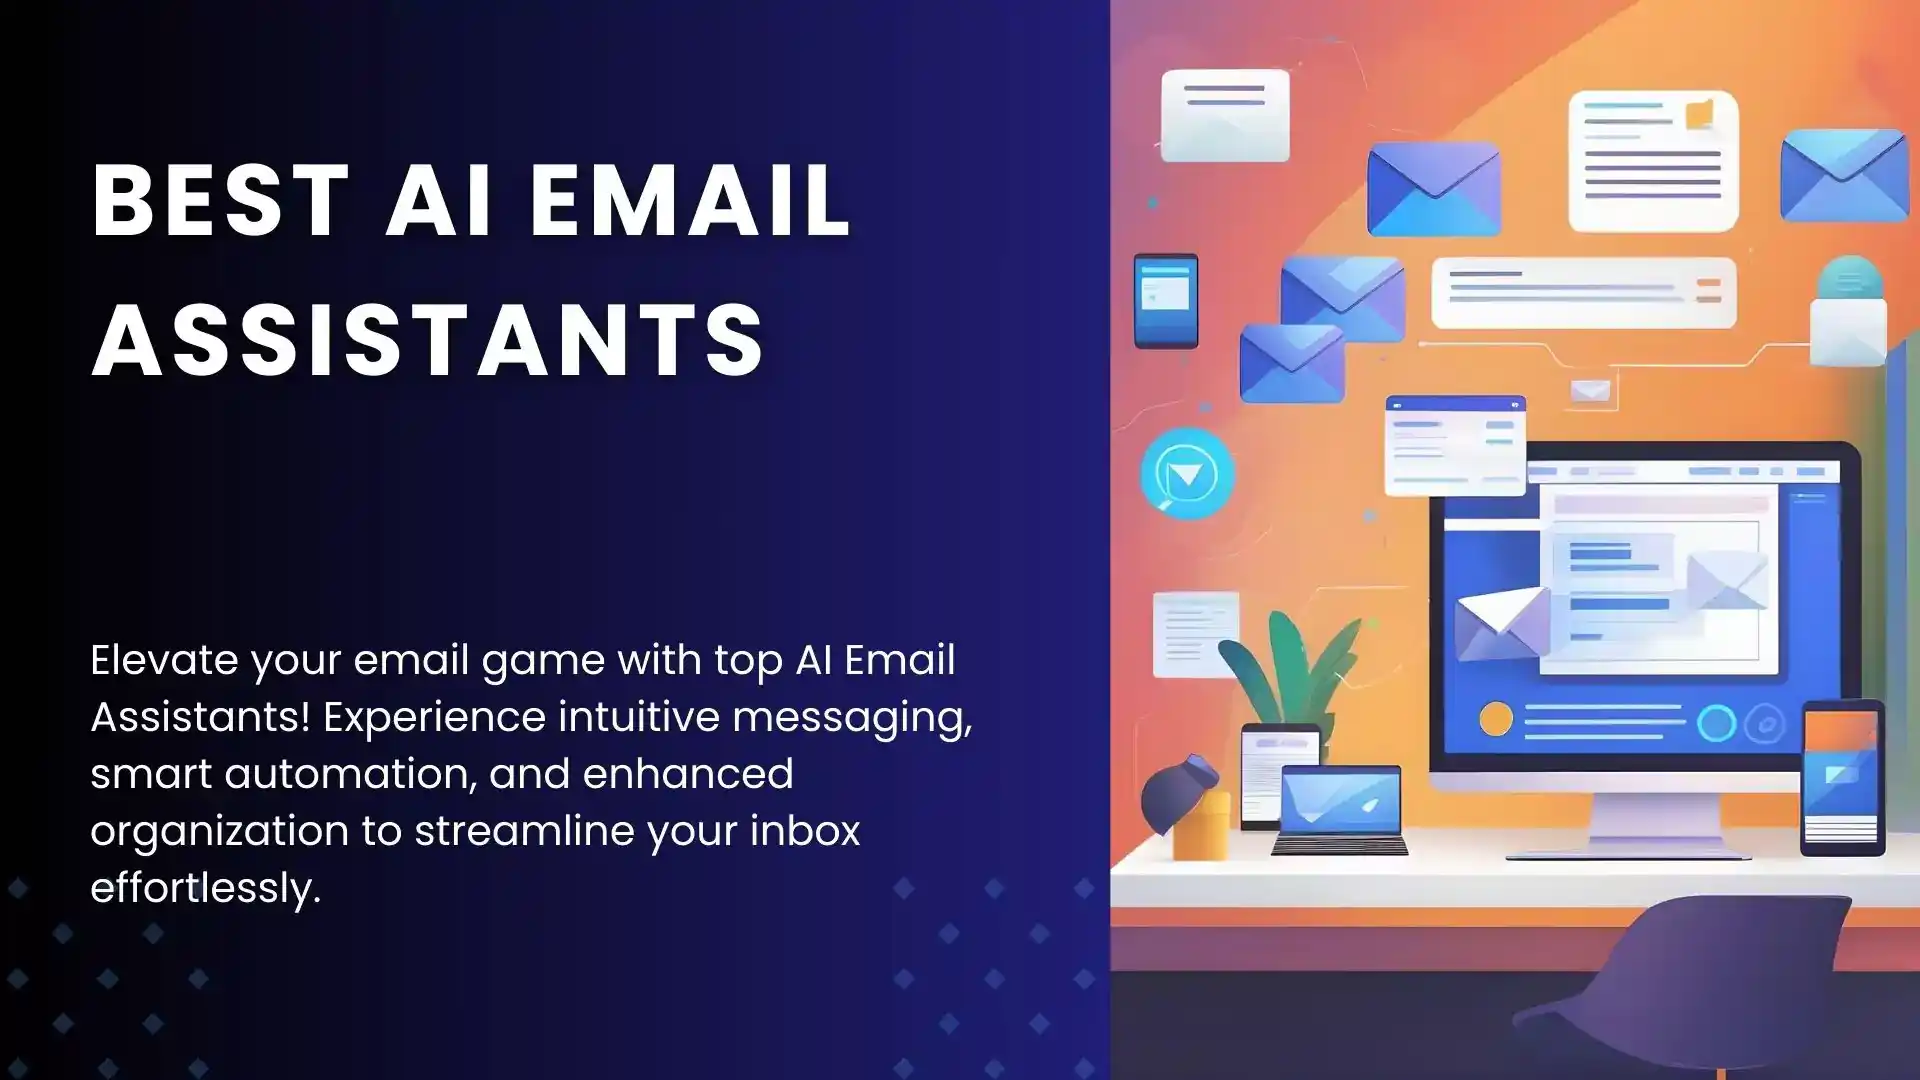 Best AI Email Assistants. Featured Image